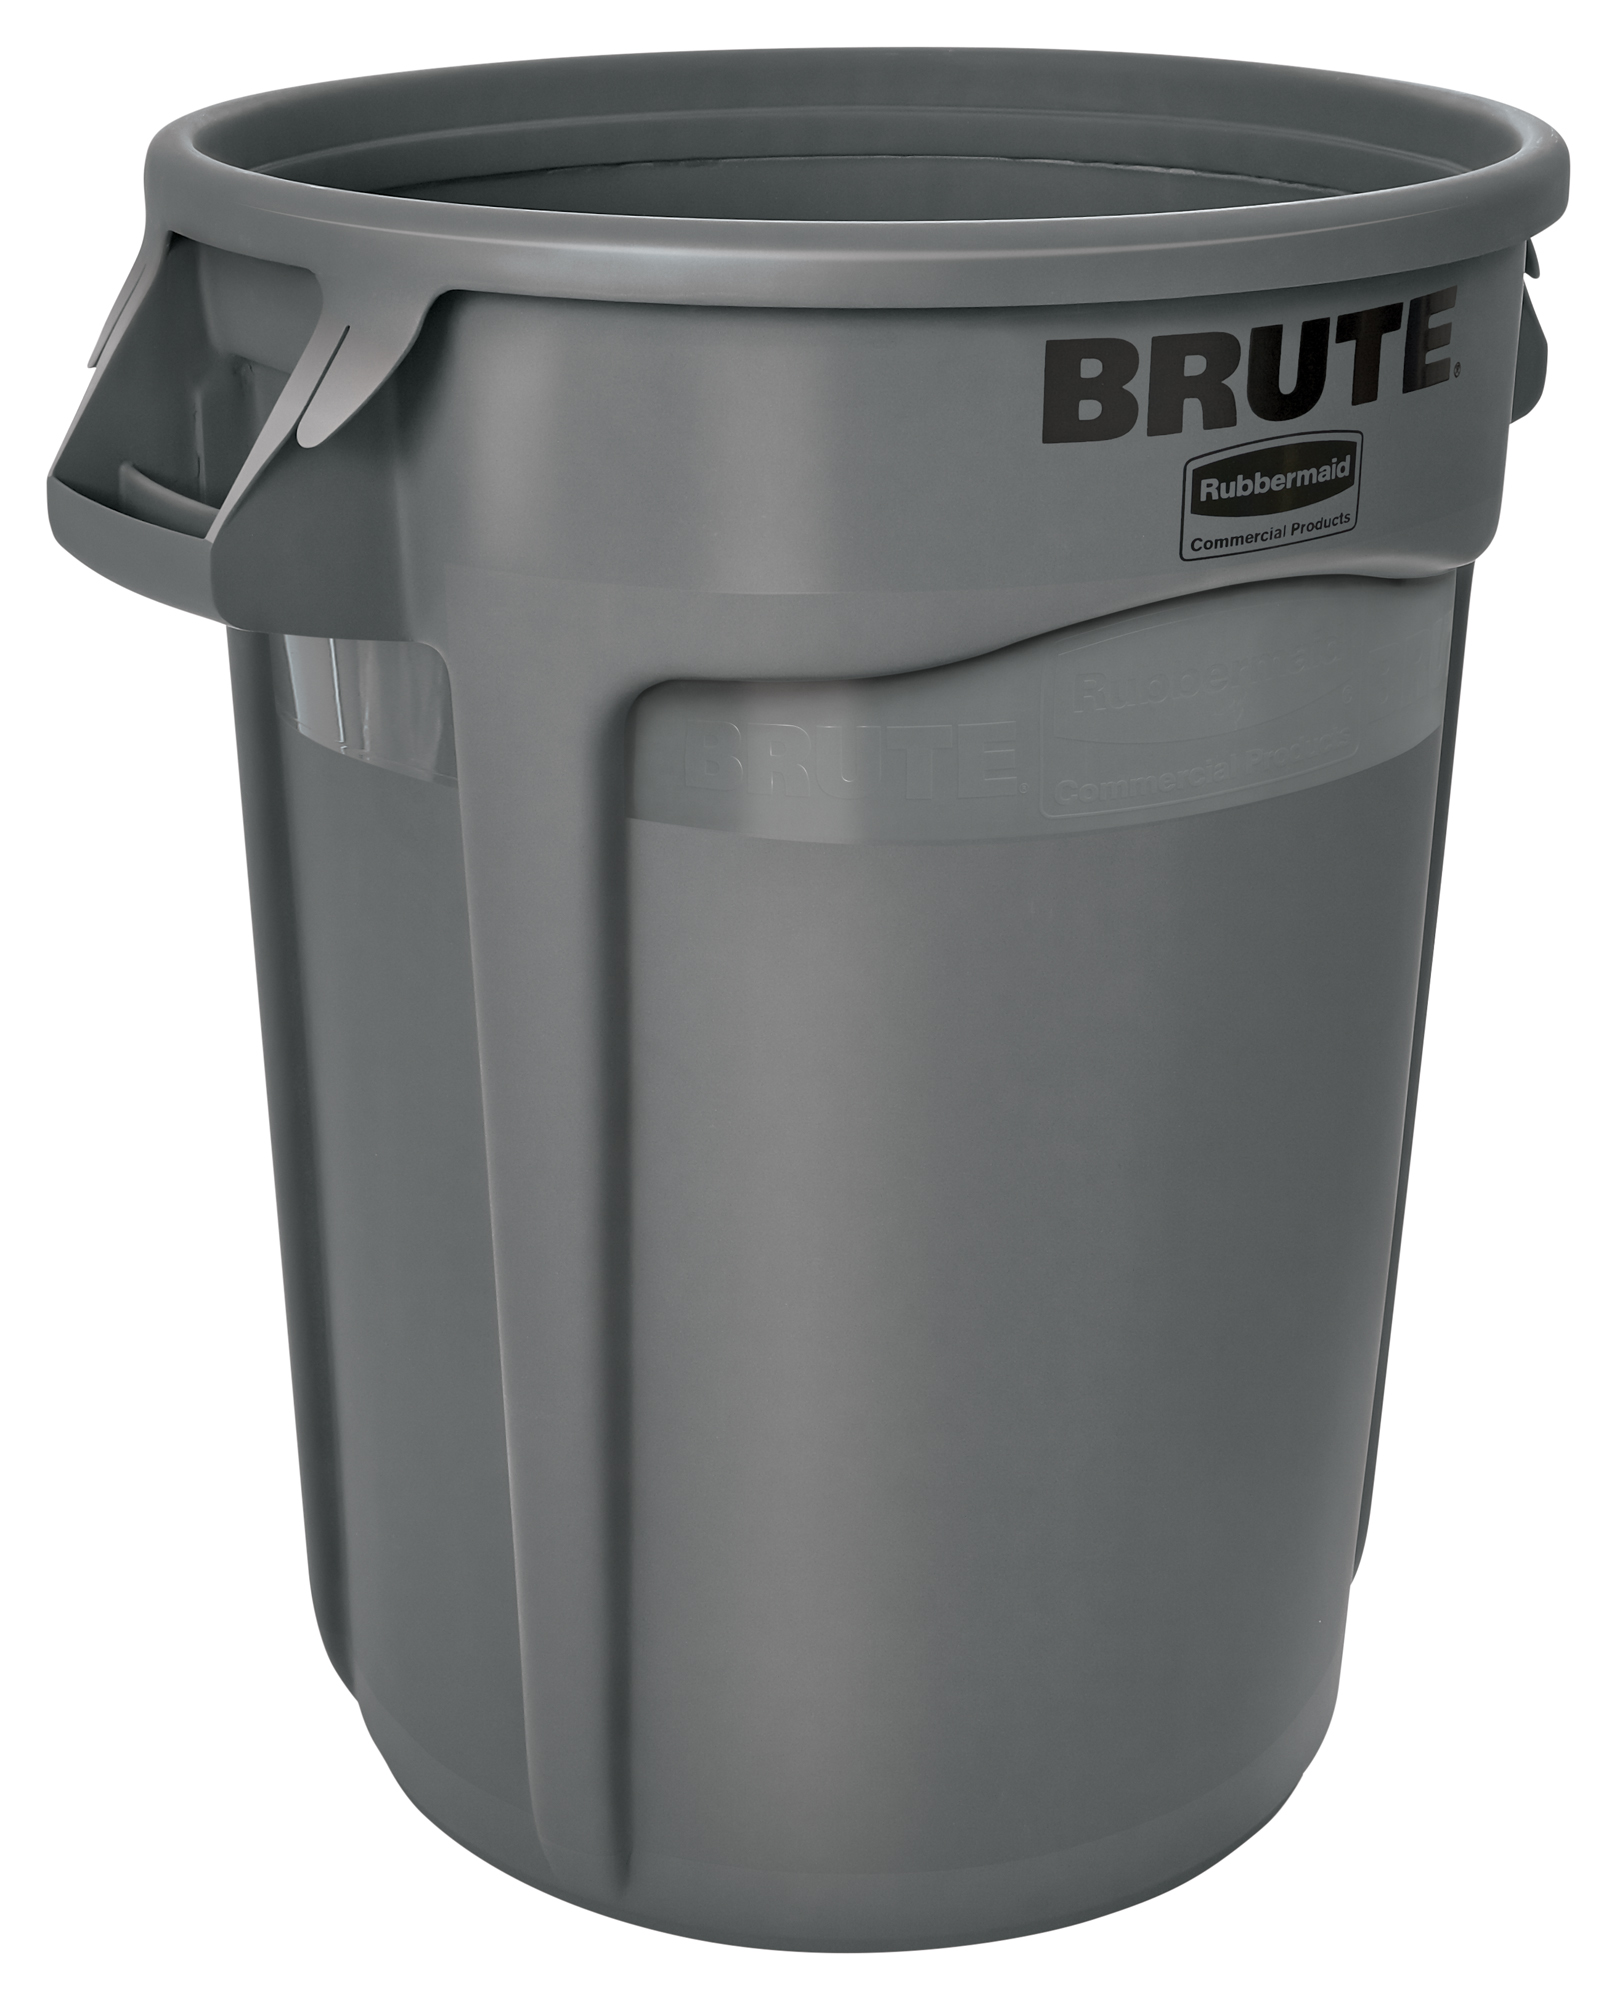 32 GAL BRUTE CONTAINER 